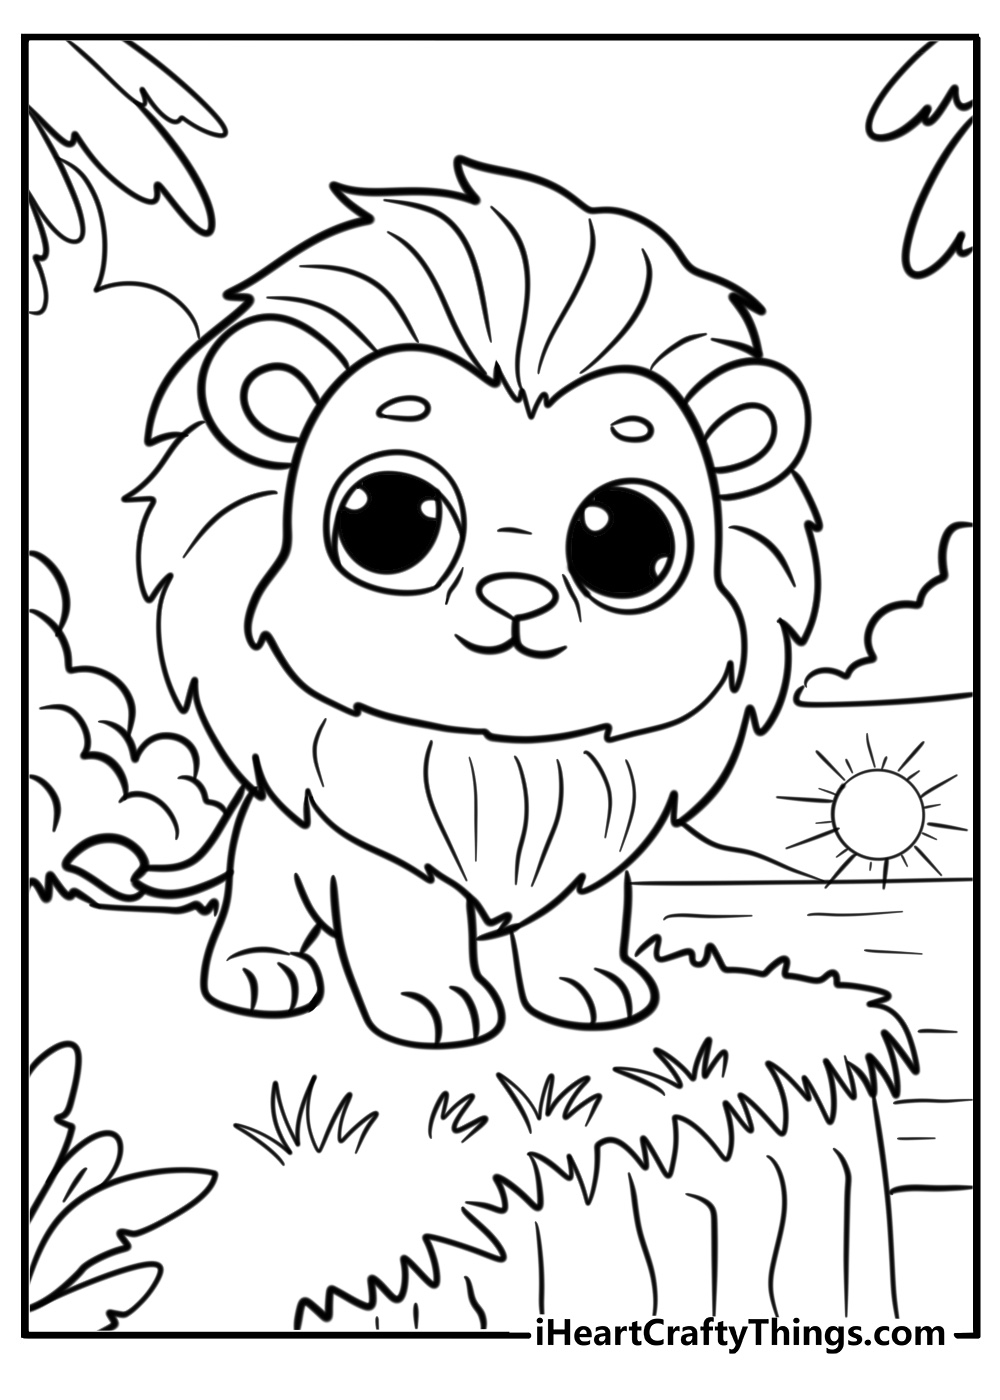 Cute animals coloring page of lion standing on a cliff